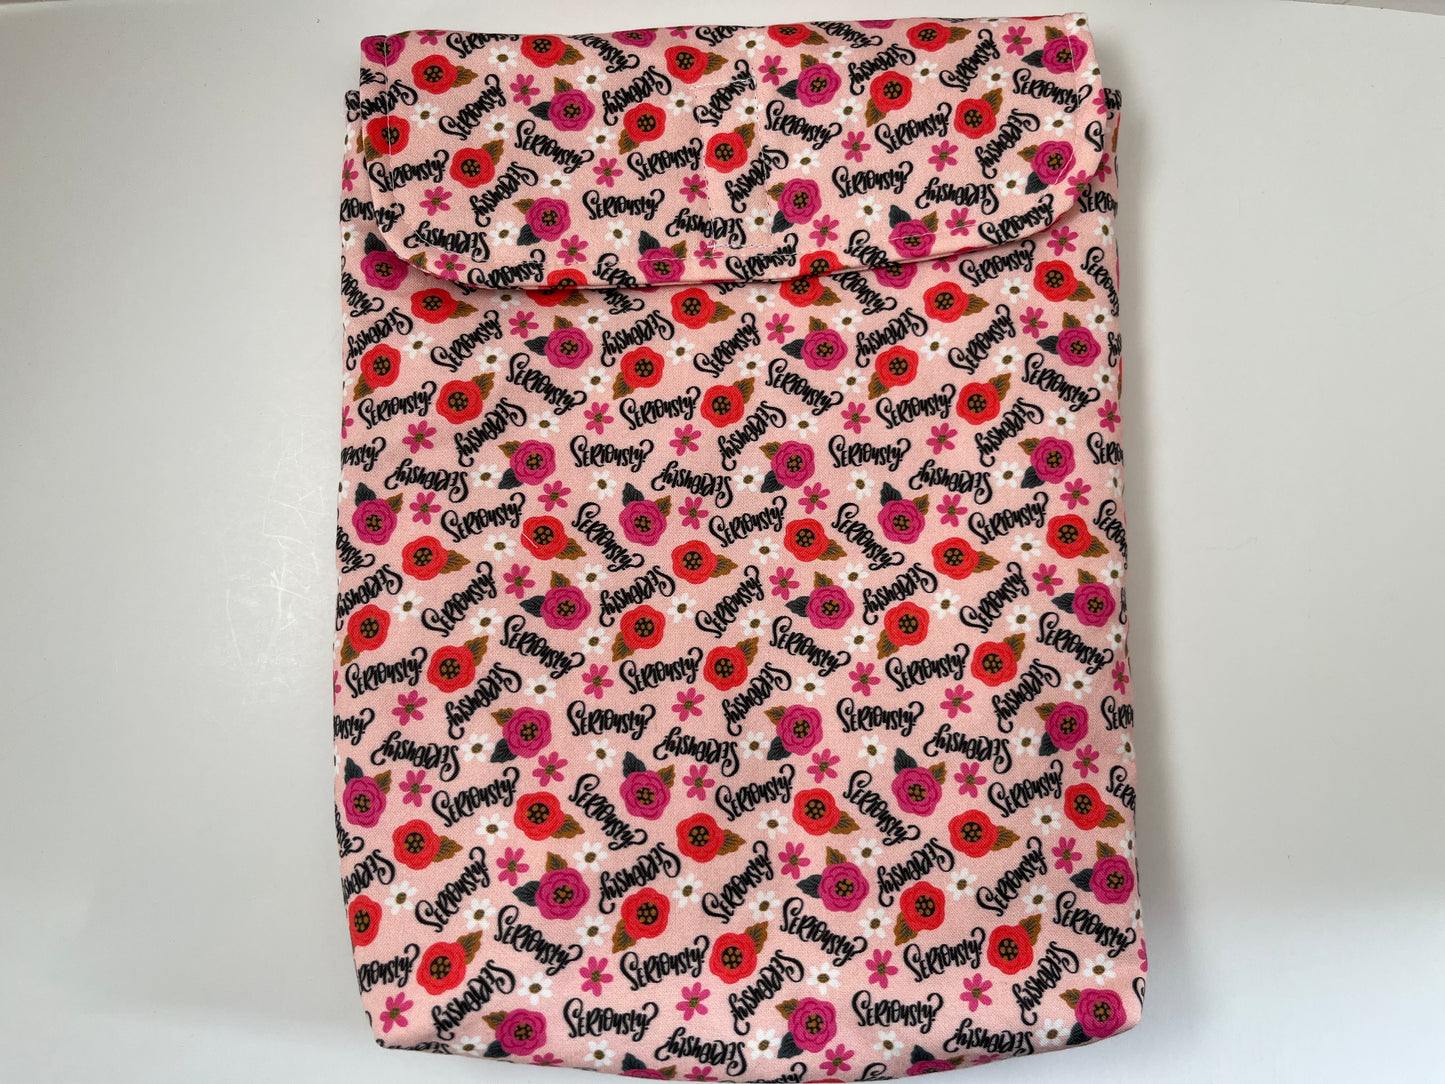 Seriously? Pink Floral Padded Book Sleeve